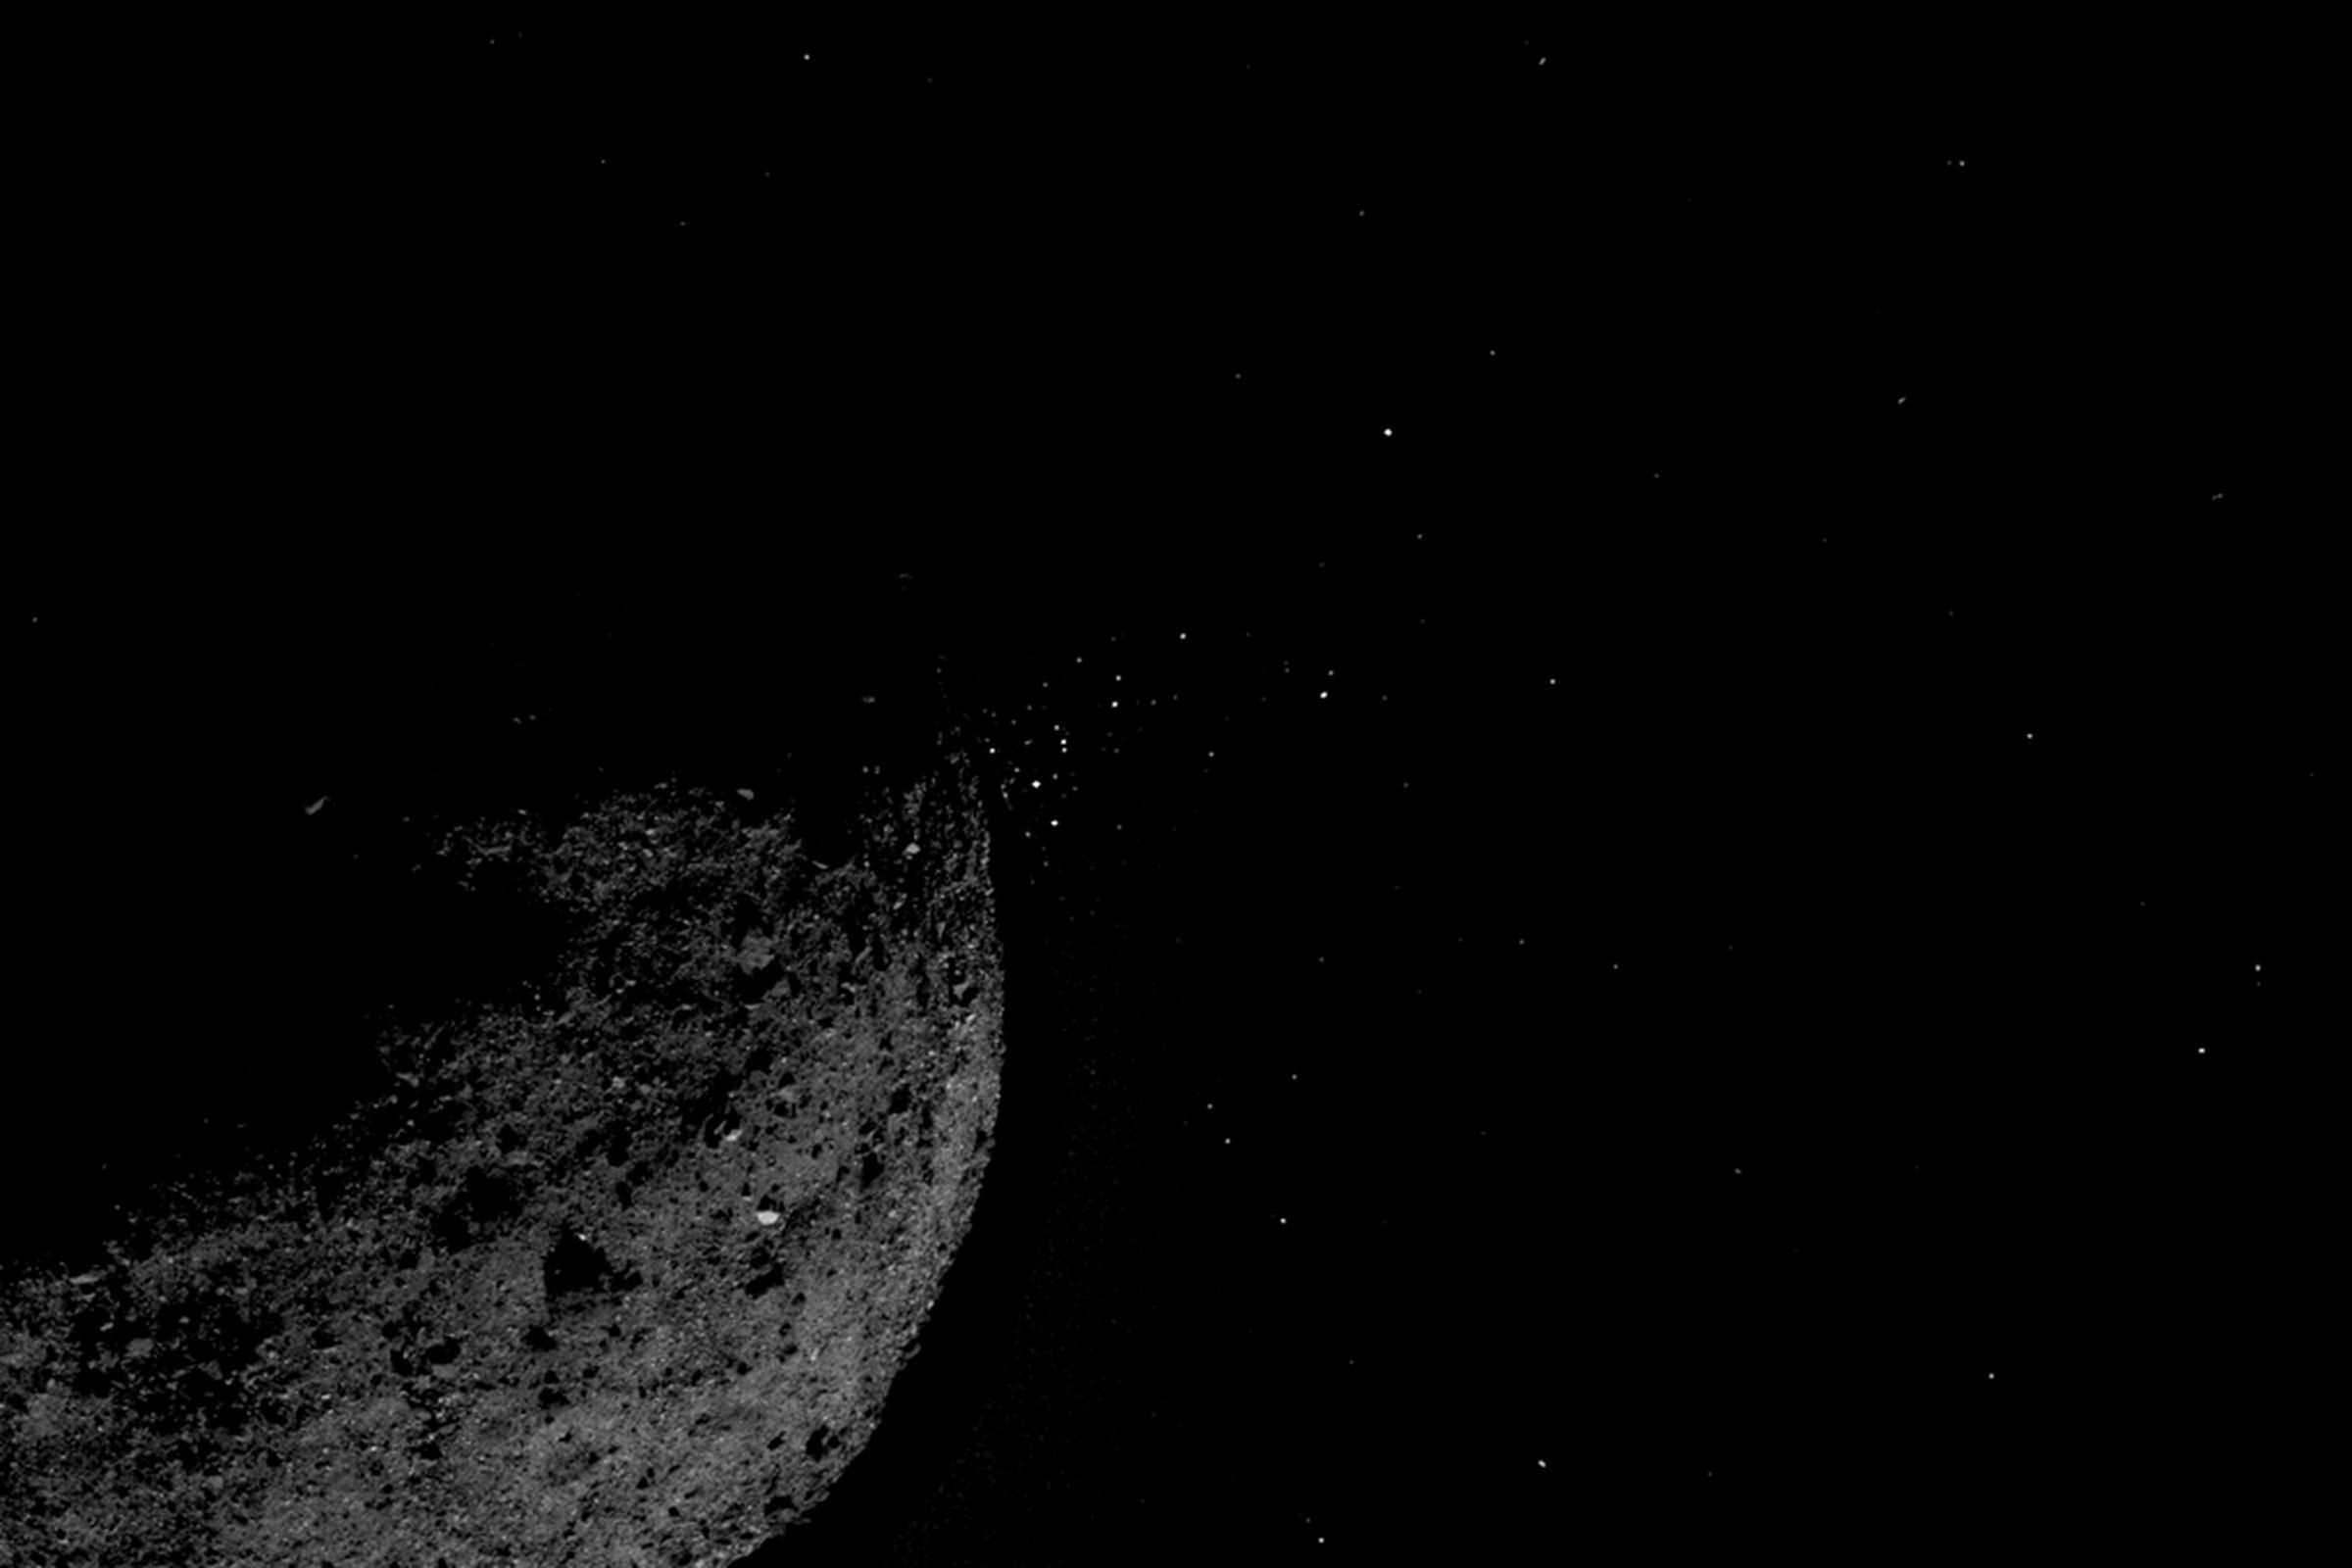 The asteroid Bennu, spewing particles into space.